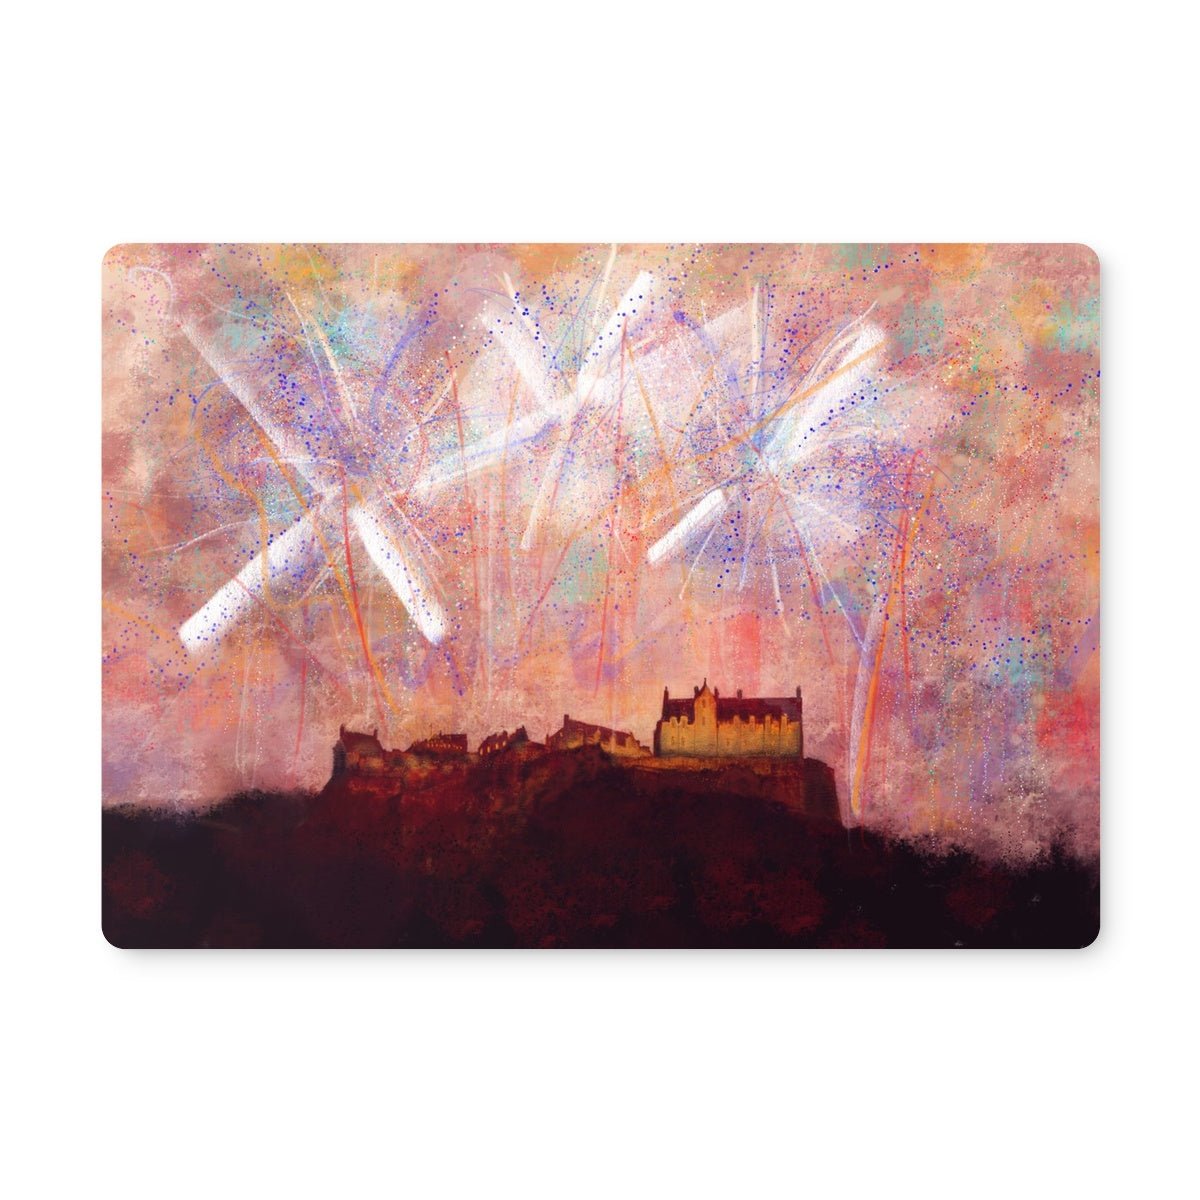 Edinburgh Castle Fireworks Art Gifts Placemat-Placemats-Edinburgh & Glasgow Art Gallery-Single Placemat-Paintings, Prints, Homeware, Art Gifts From Scotland By Scottish Artist Kevin Hunter